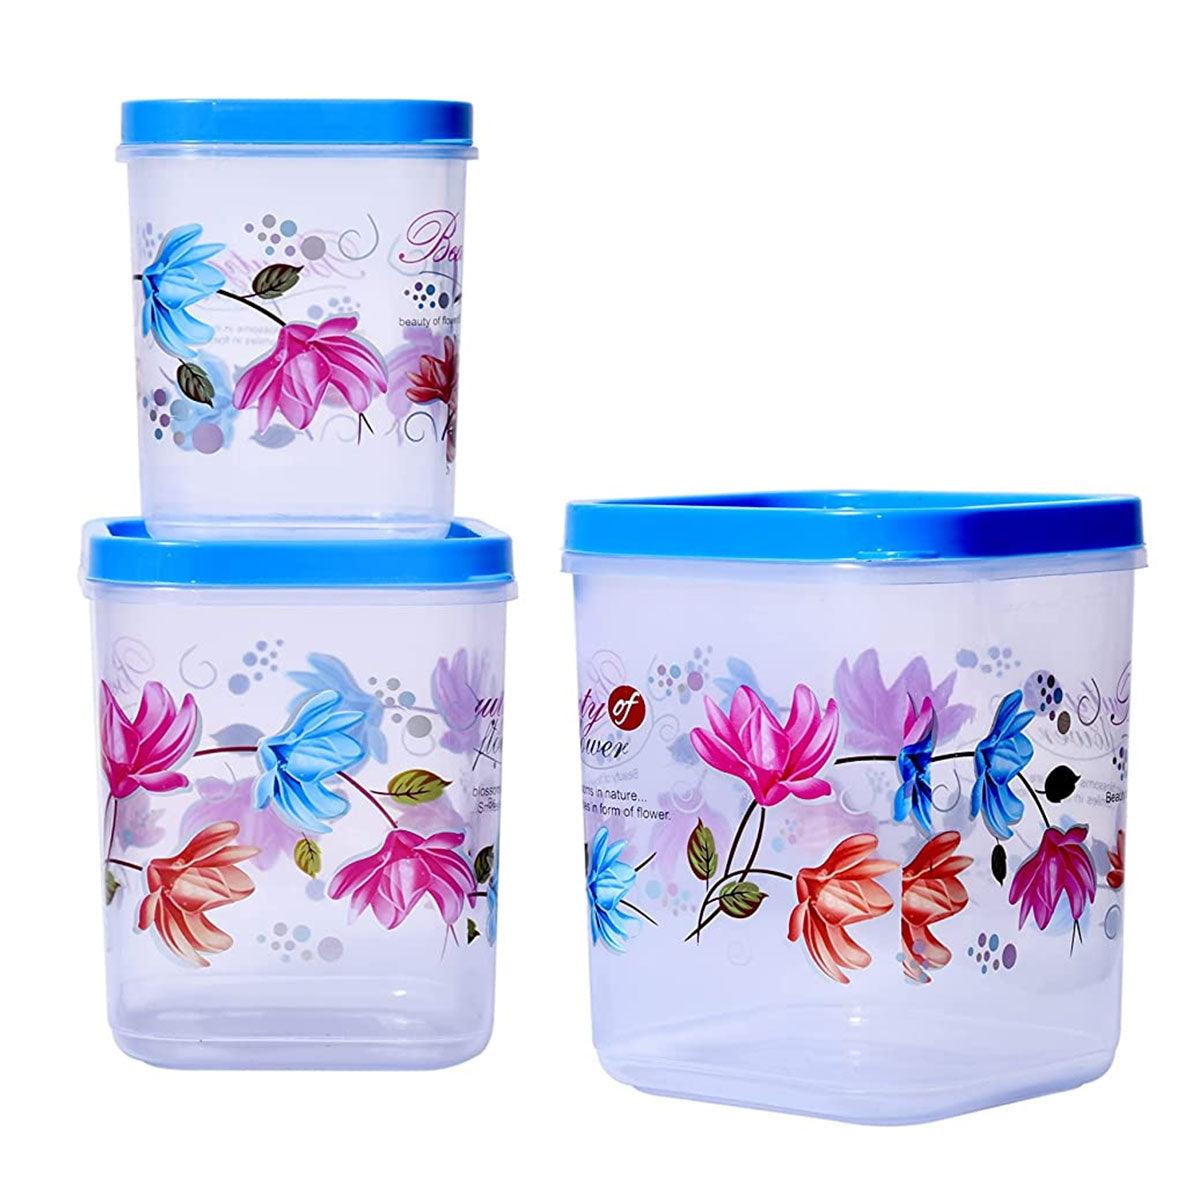 Kitchen Storage Containers Transparent 1000 ml, 2000 ml, 3000 ml Set of 3 Blue - TruVeli